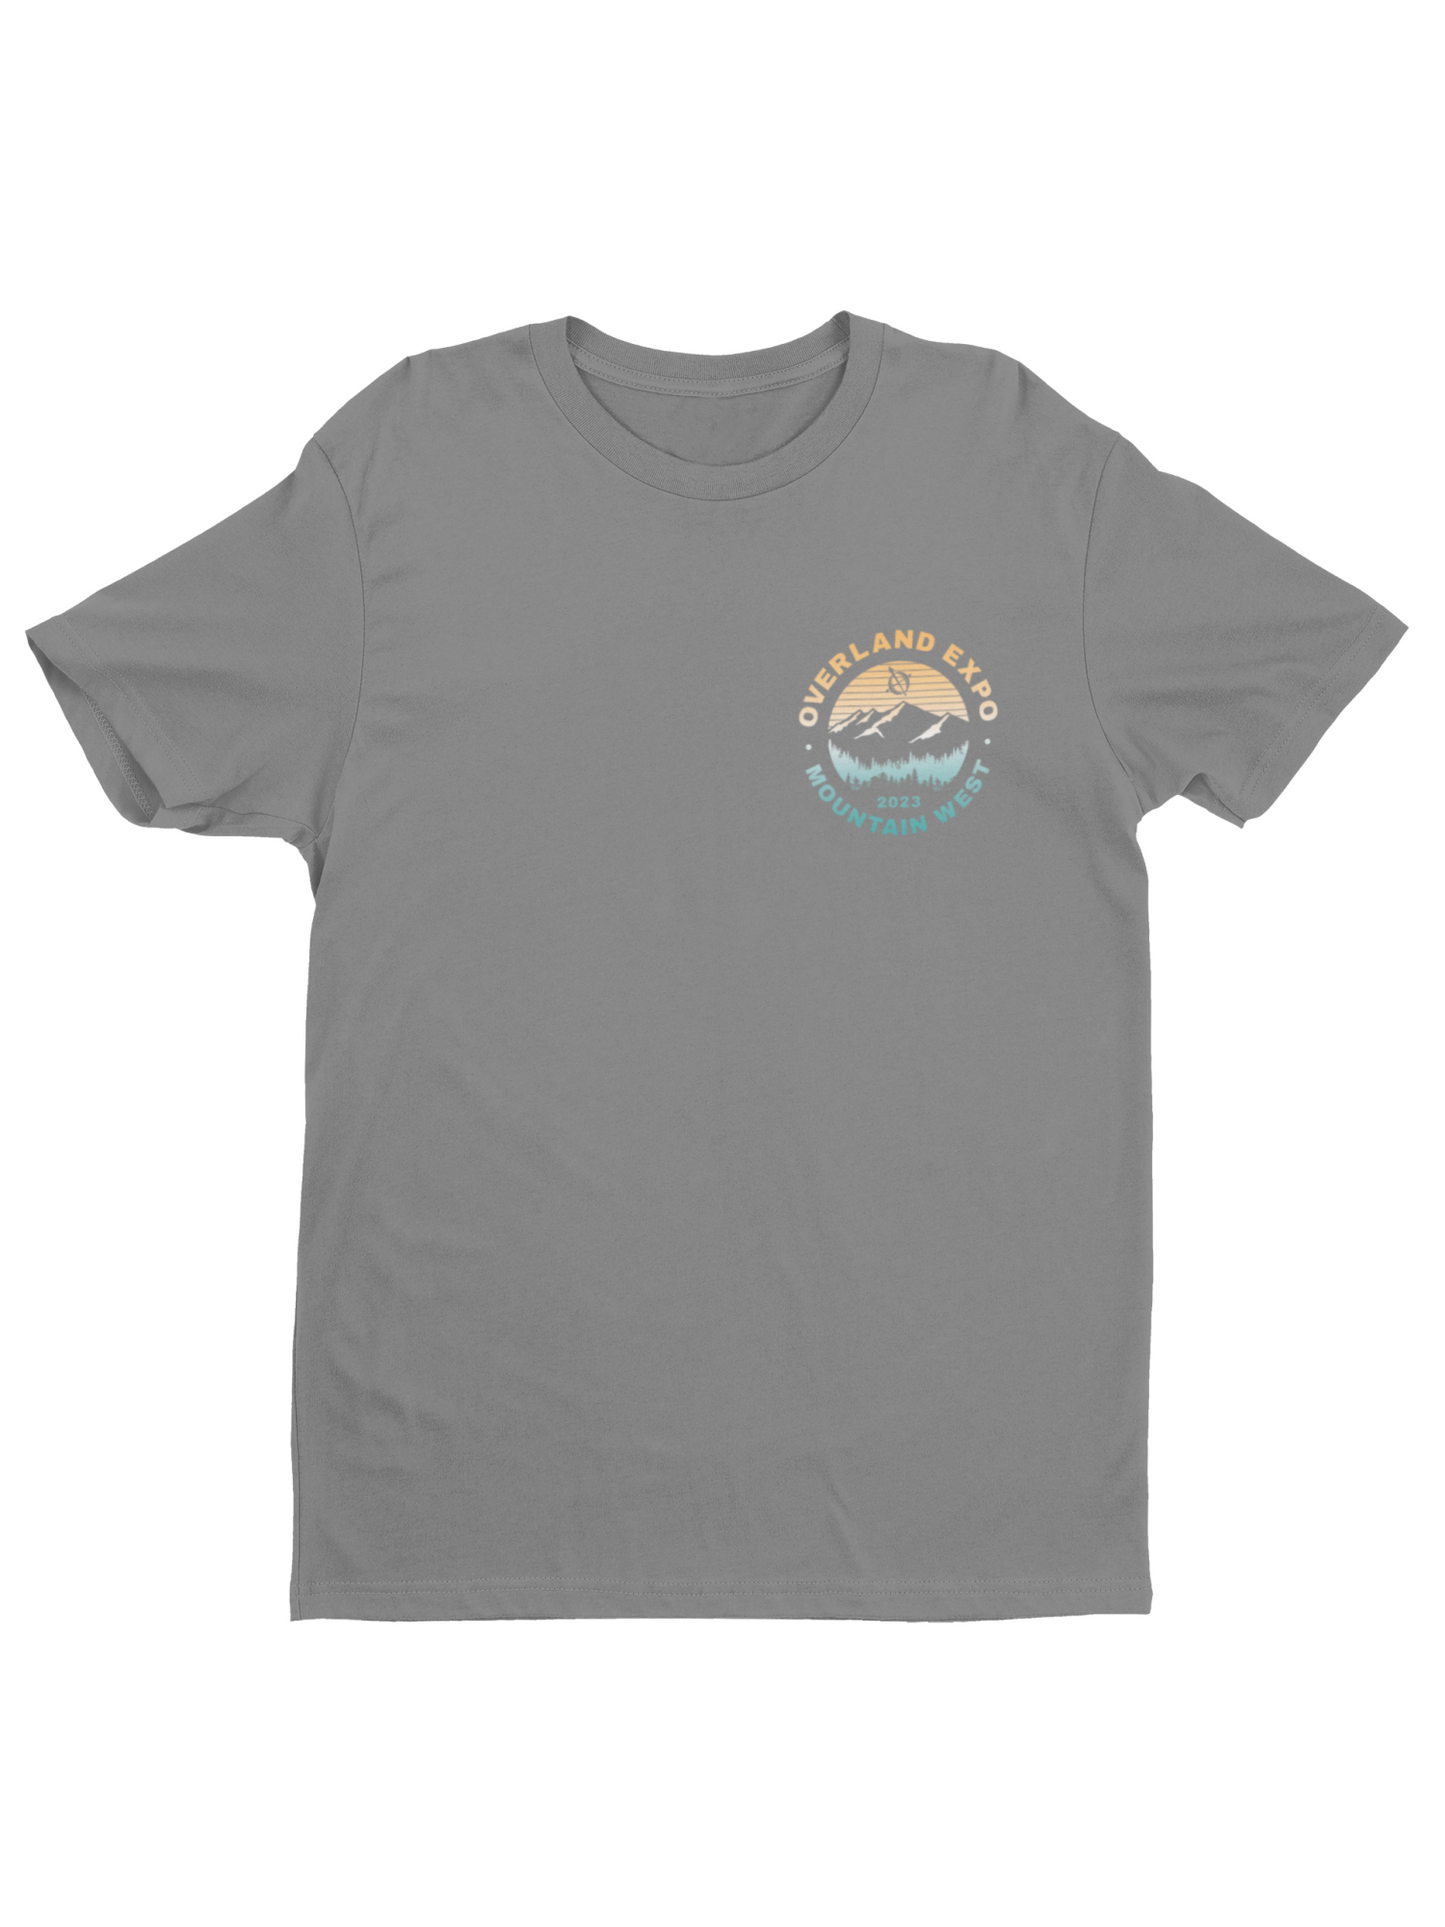 OE Mountain West 2023 - Limited Edition Tee - Charcoal Grey